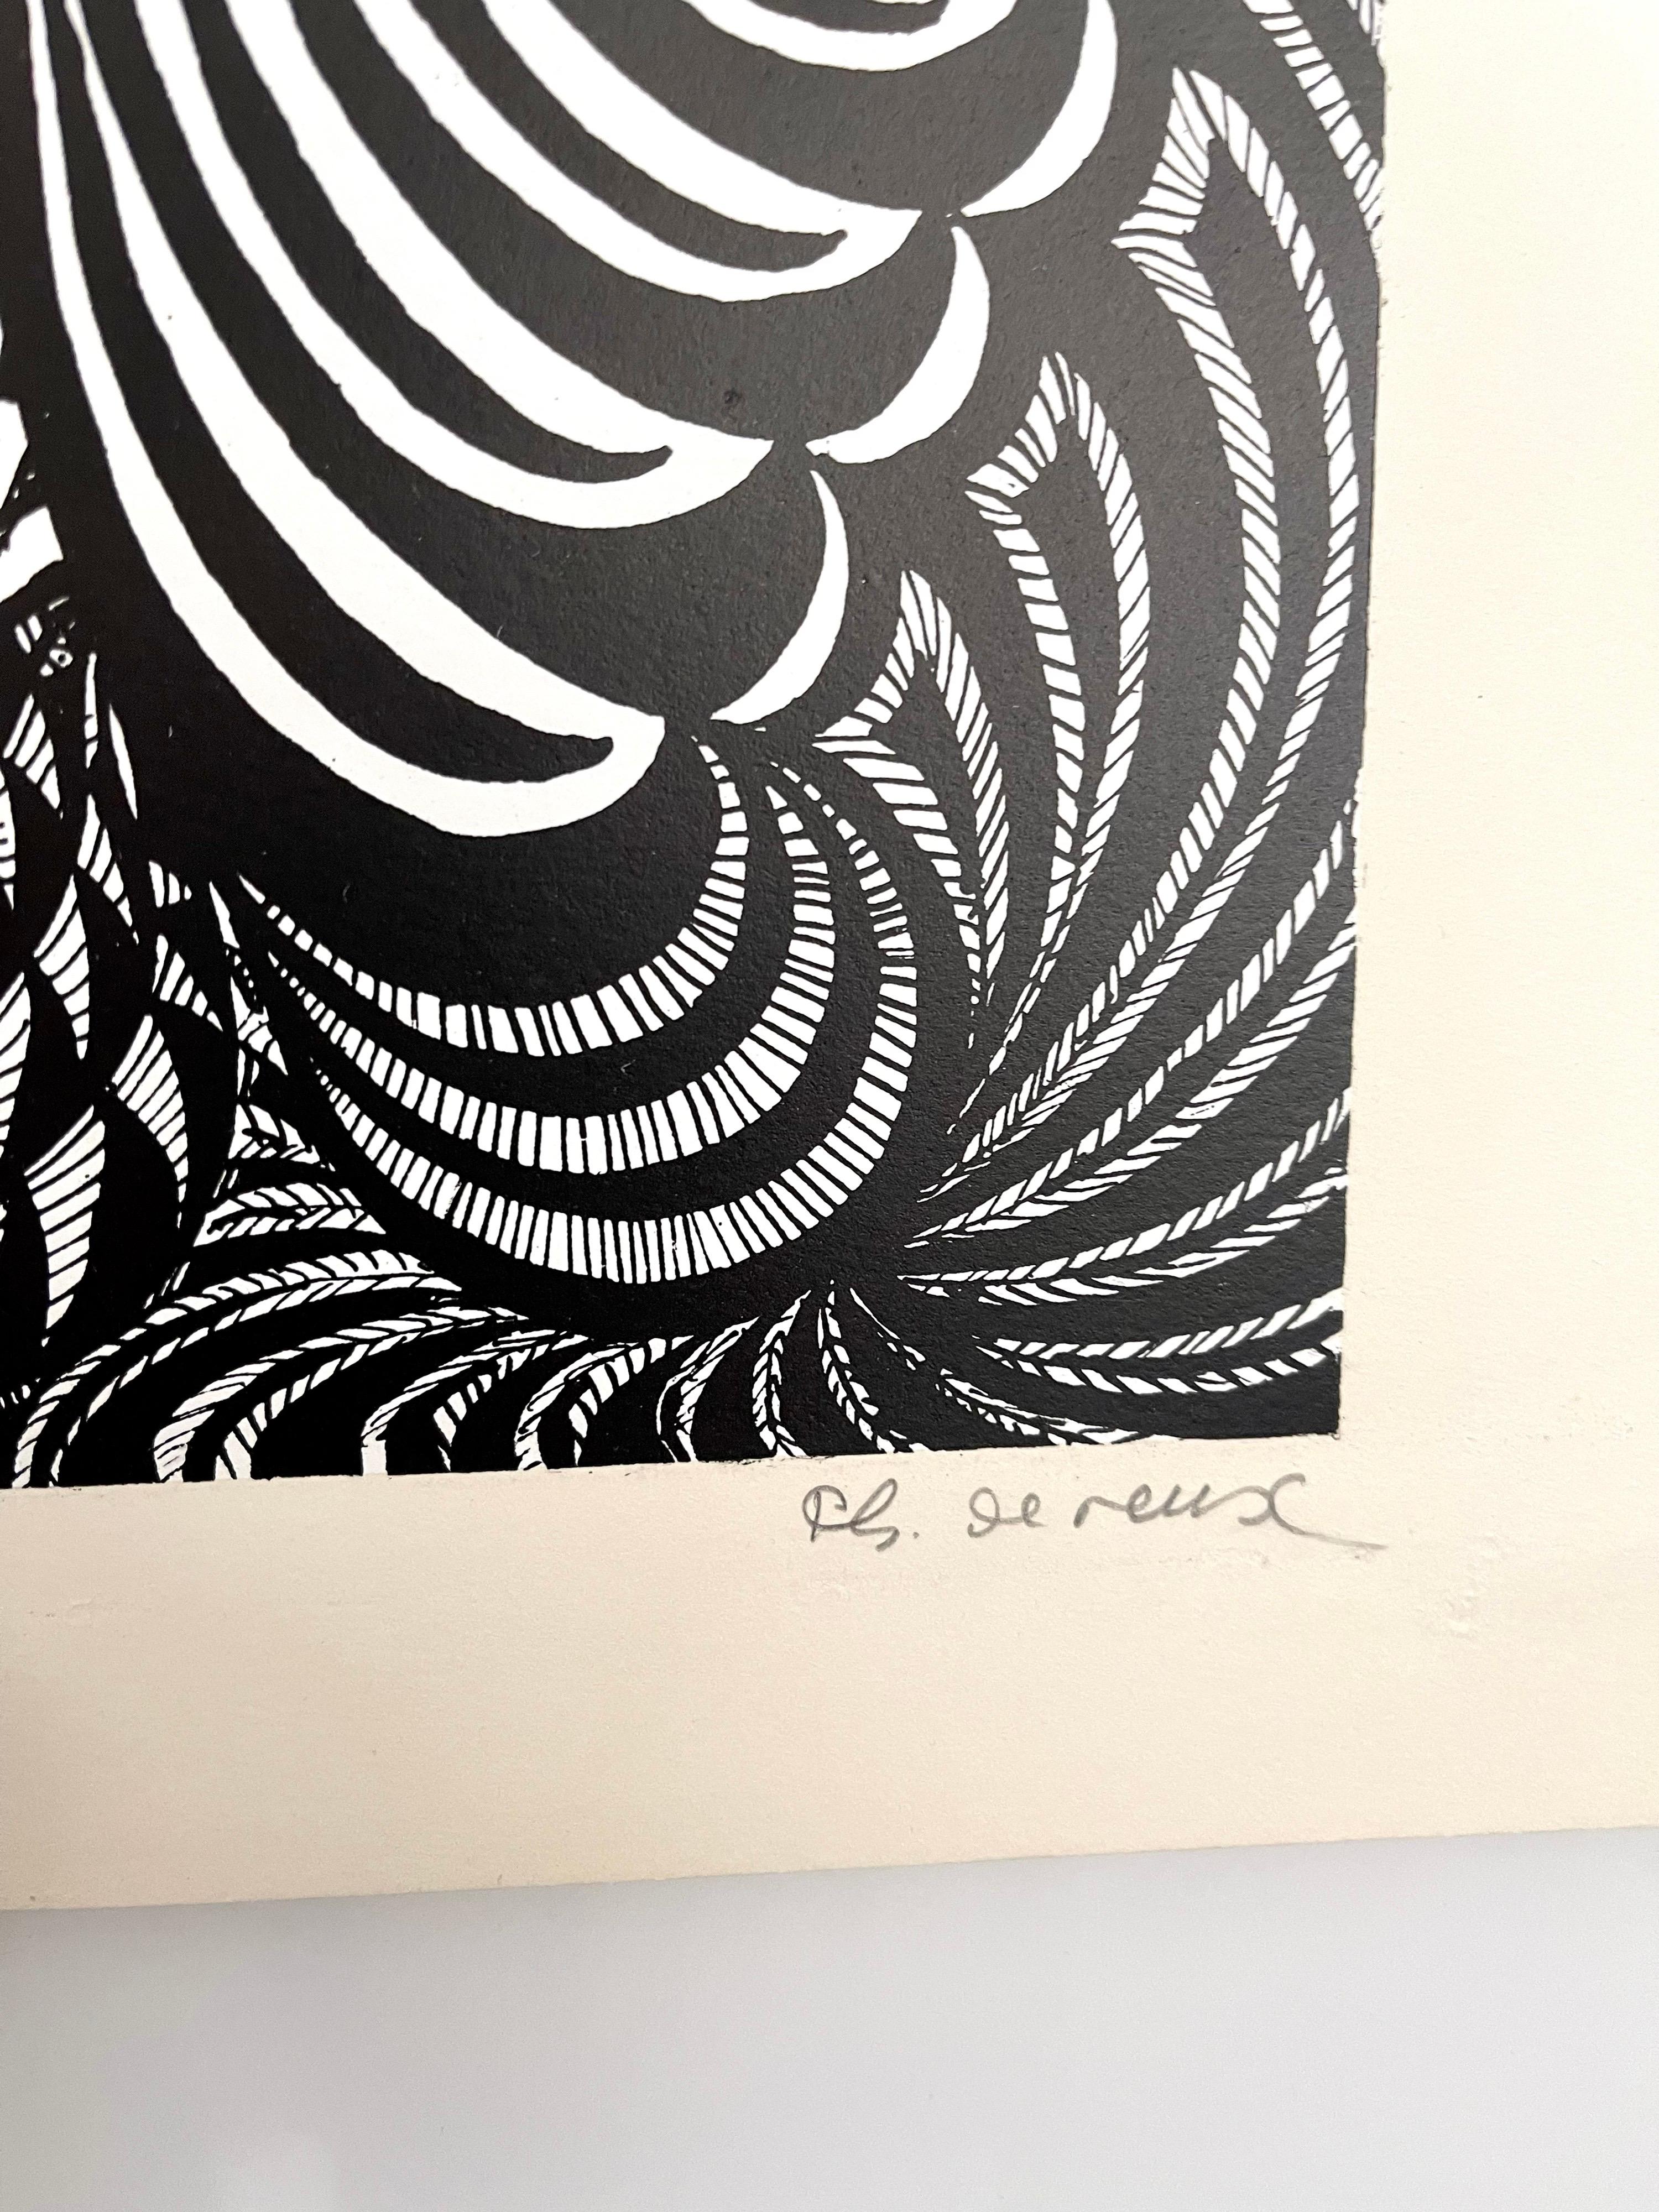 Large 1960s French Art Brut Lithograph Bold Black & White Op Art Philippe Dereux For Sale 1